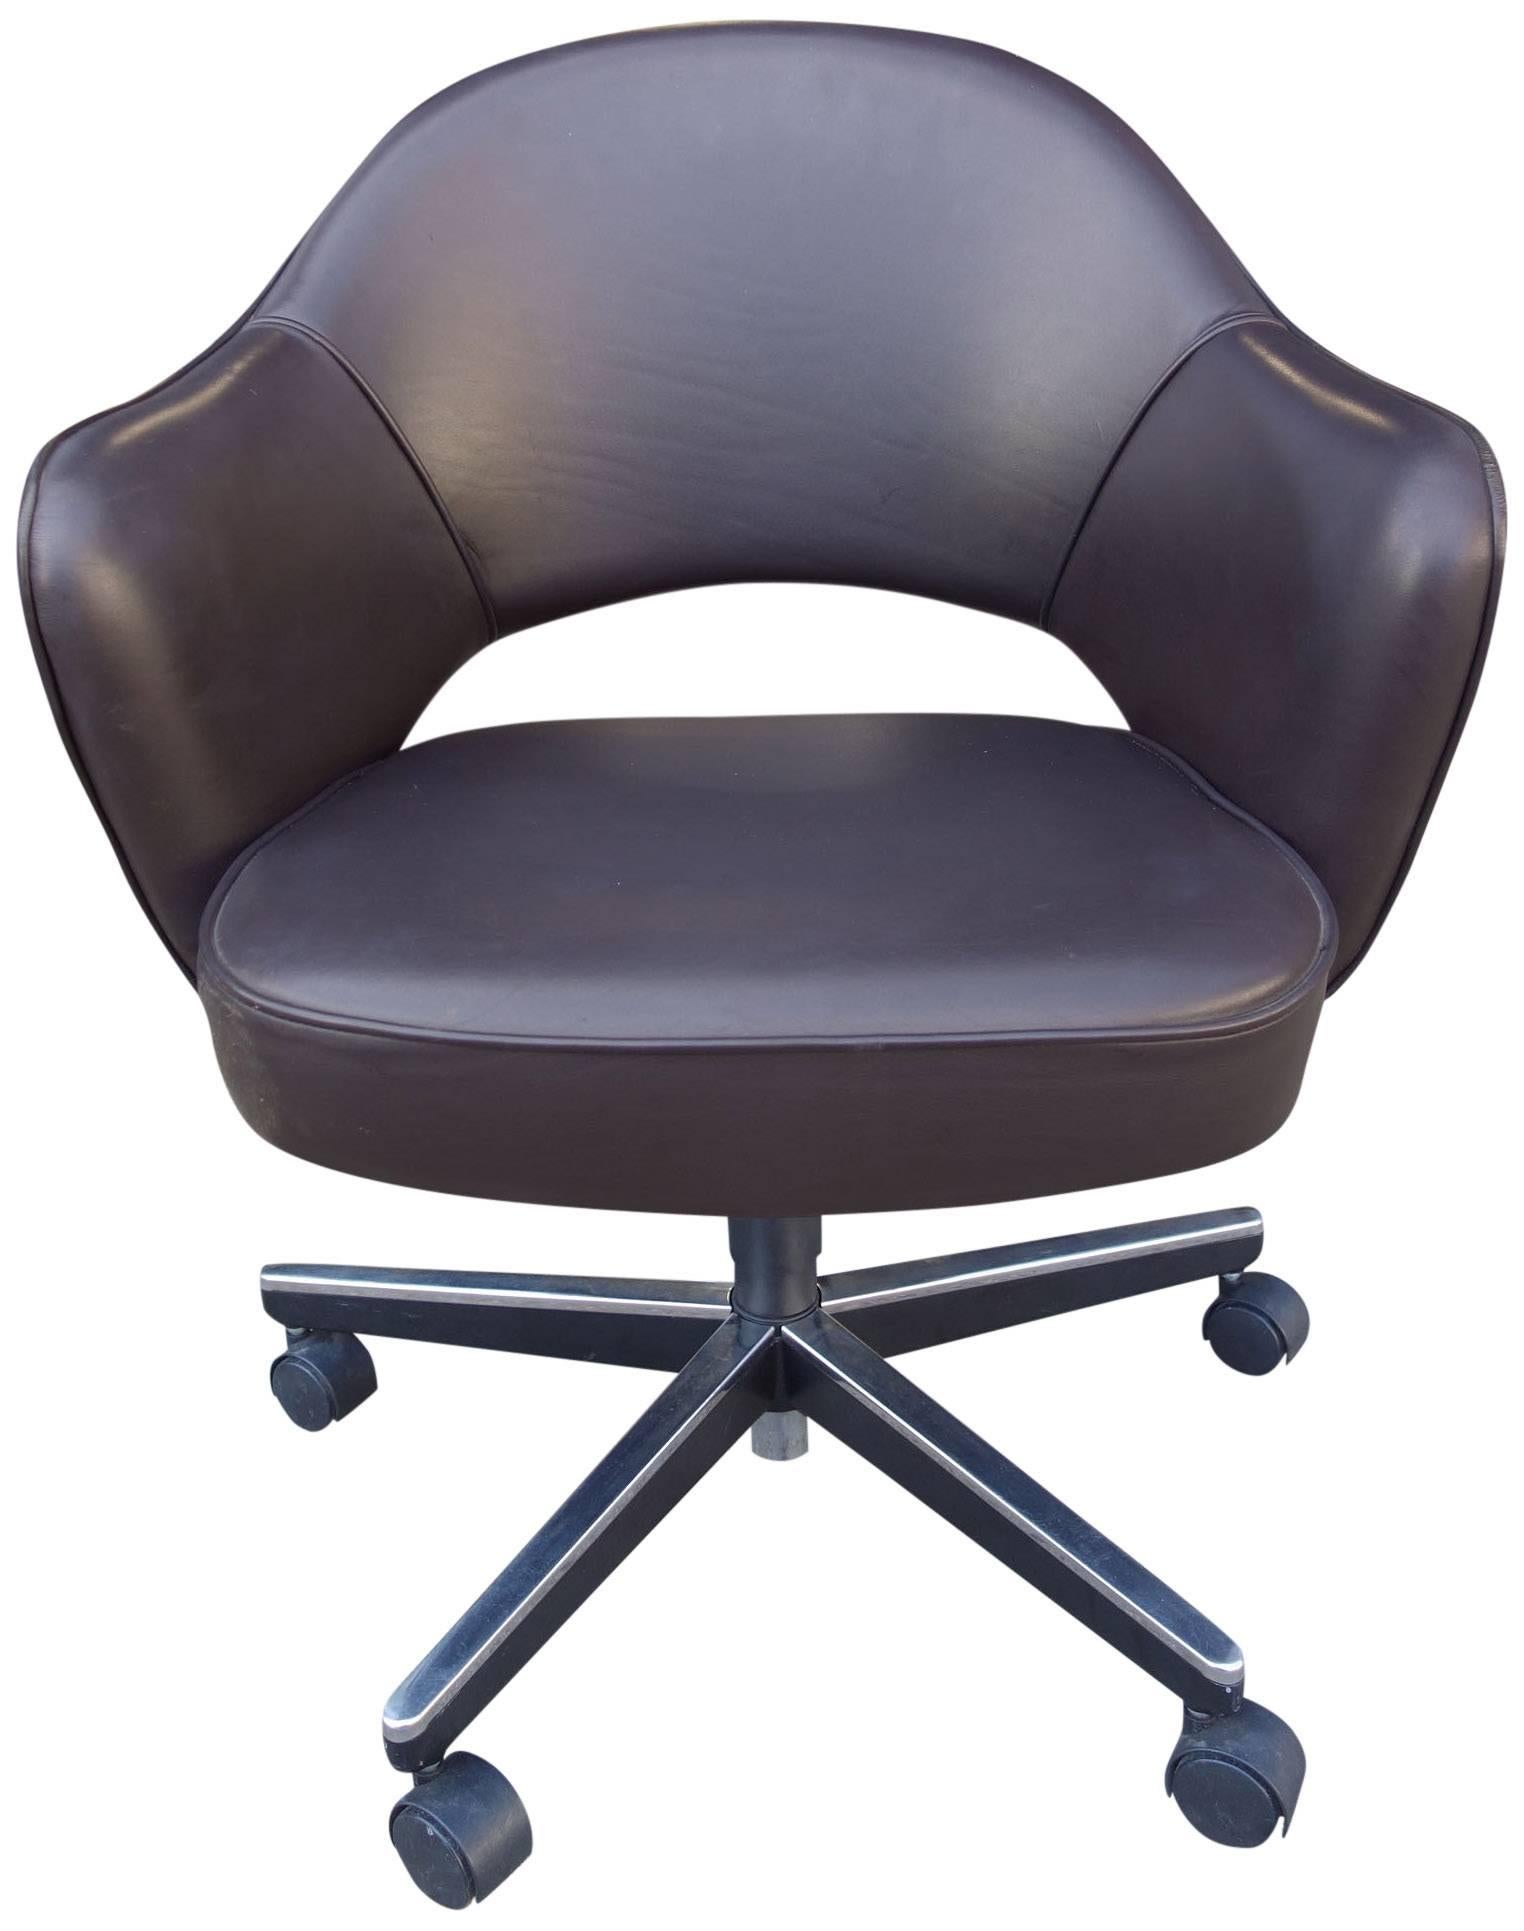 Classic Saarinen armchairs on casters with height and tilt adjustments. Chocolate brown leather. Up to 6 available.